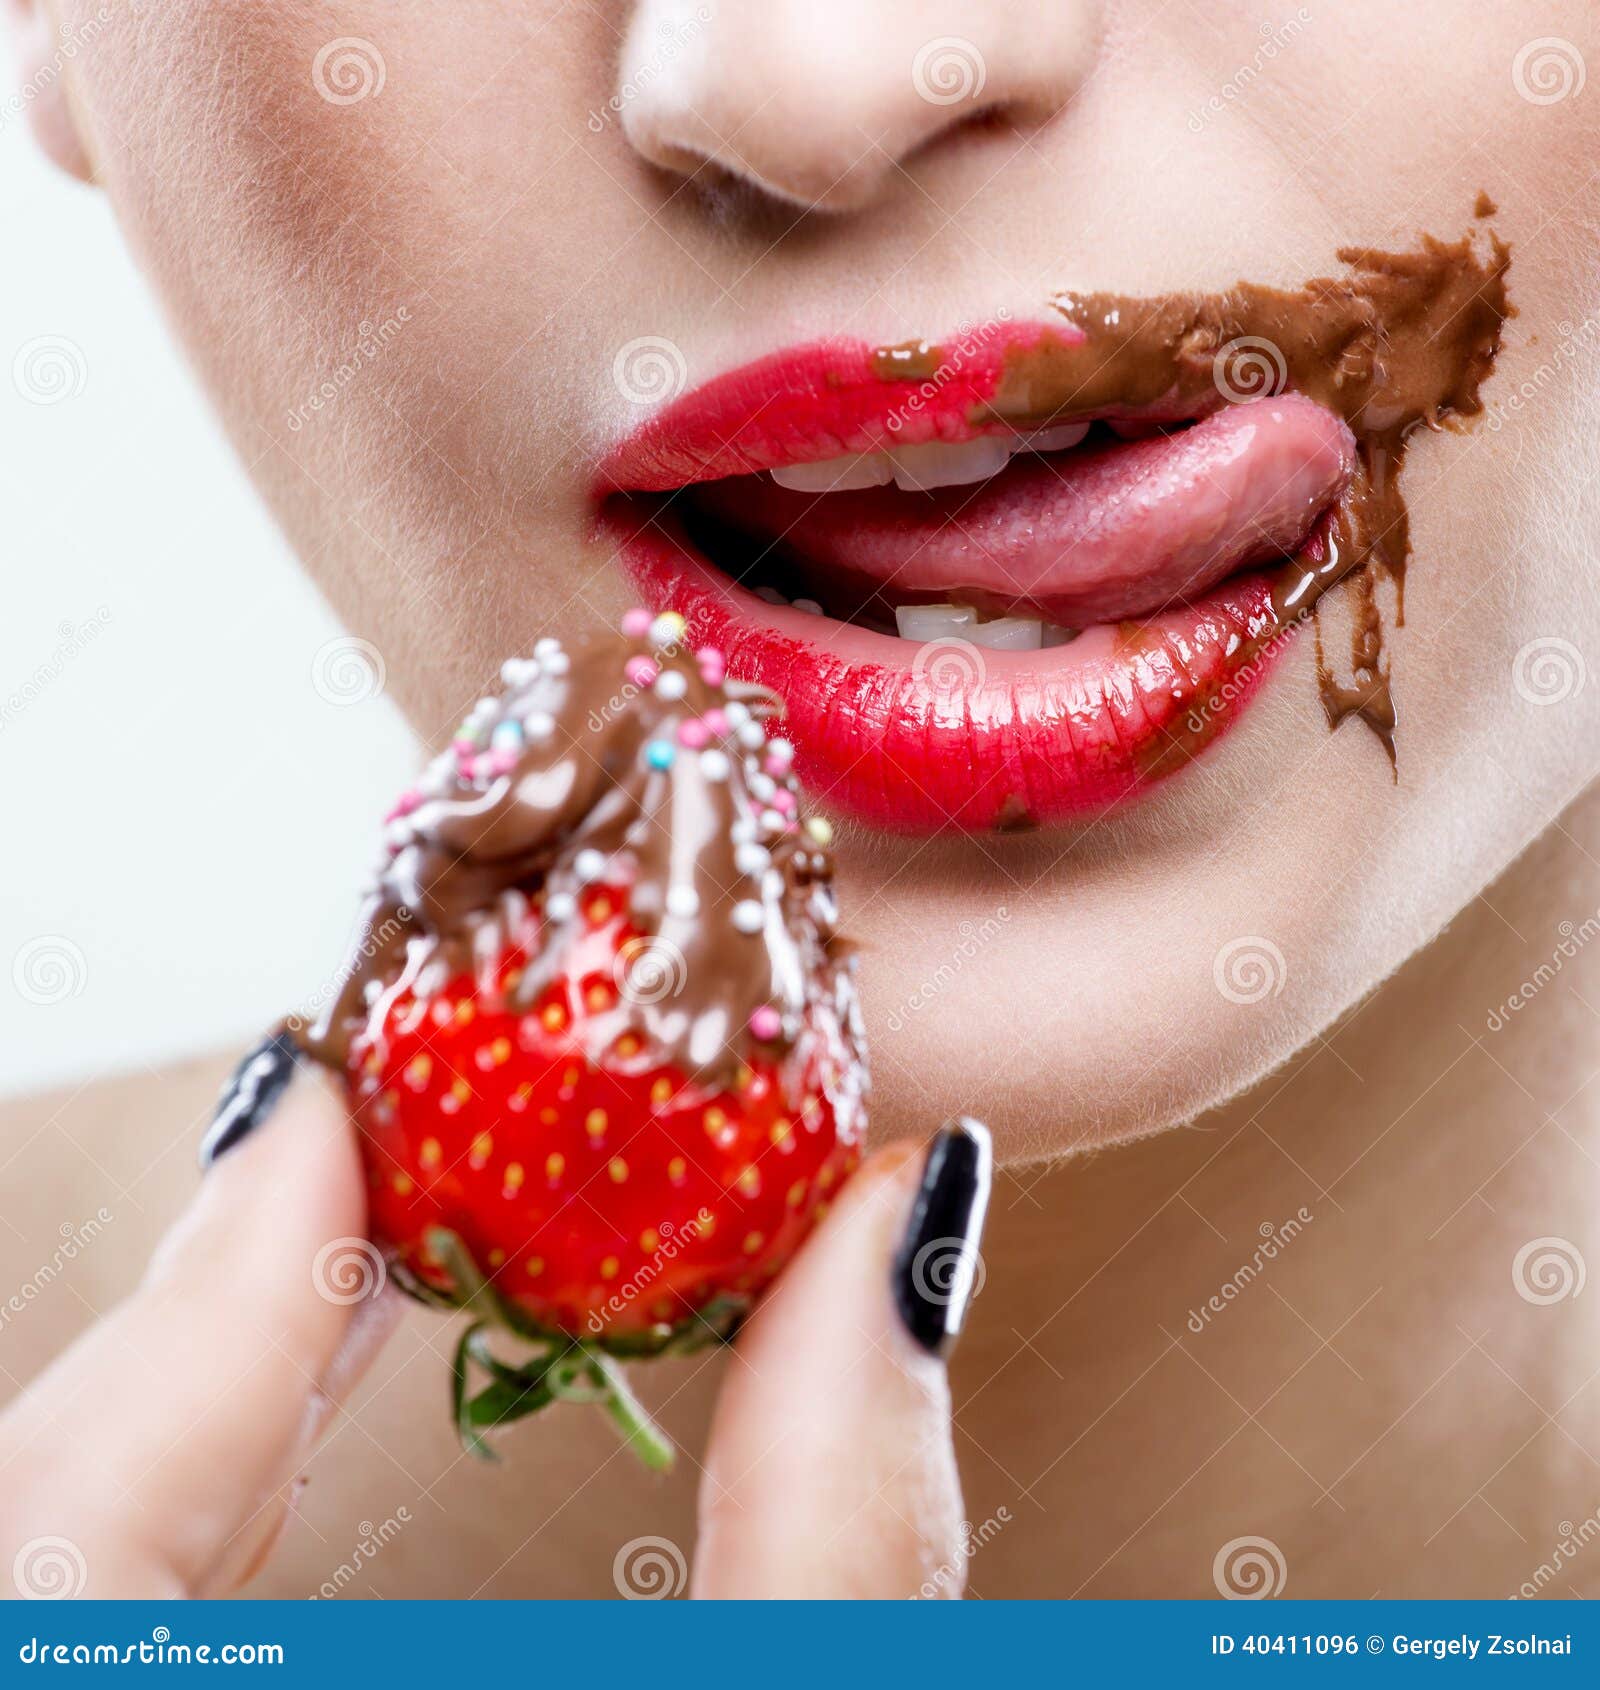 seduction - red female lips with chocolate mouth , holding strawberries